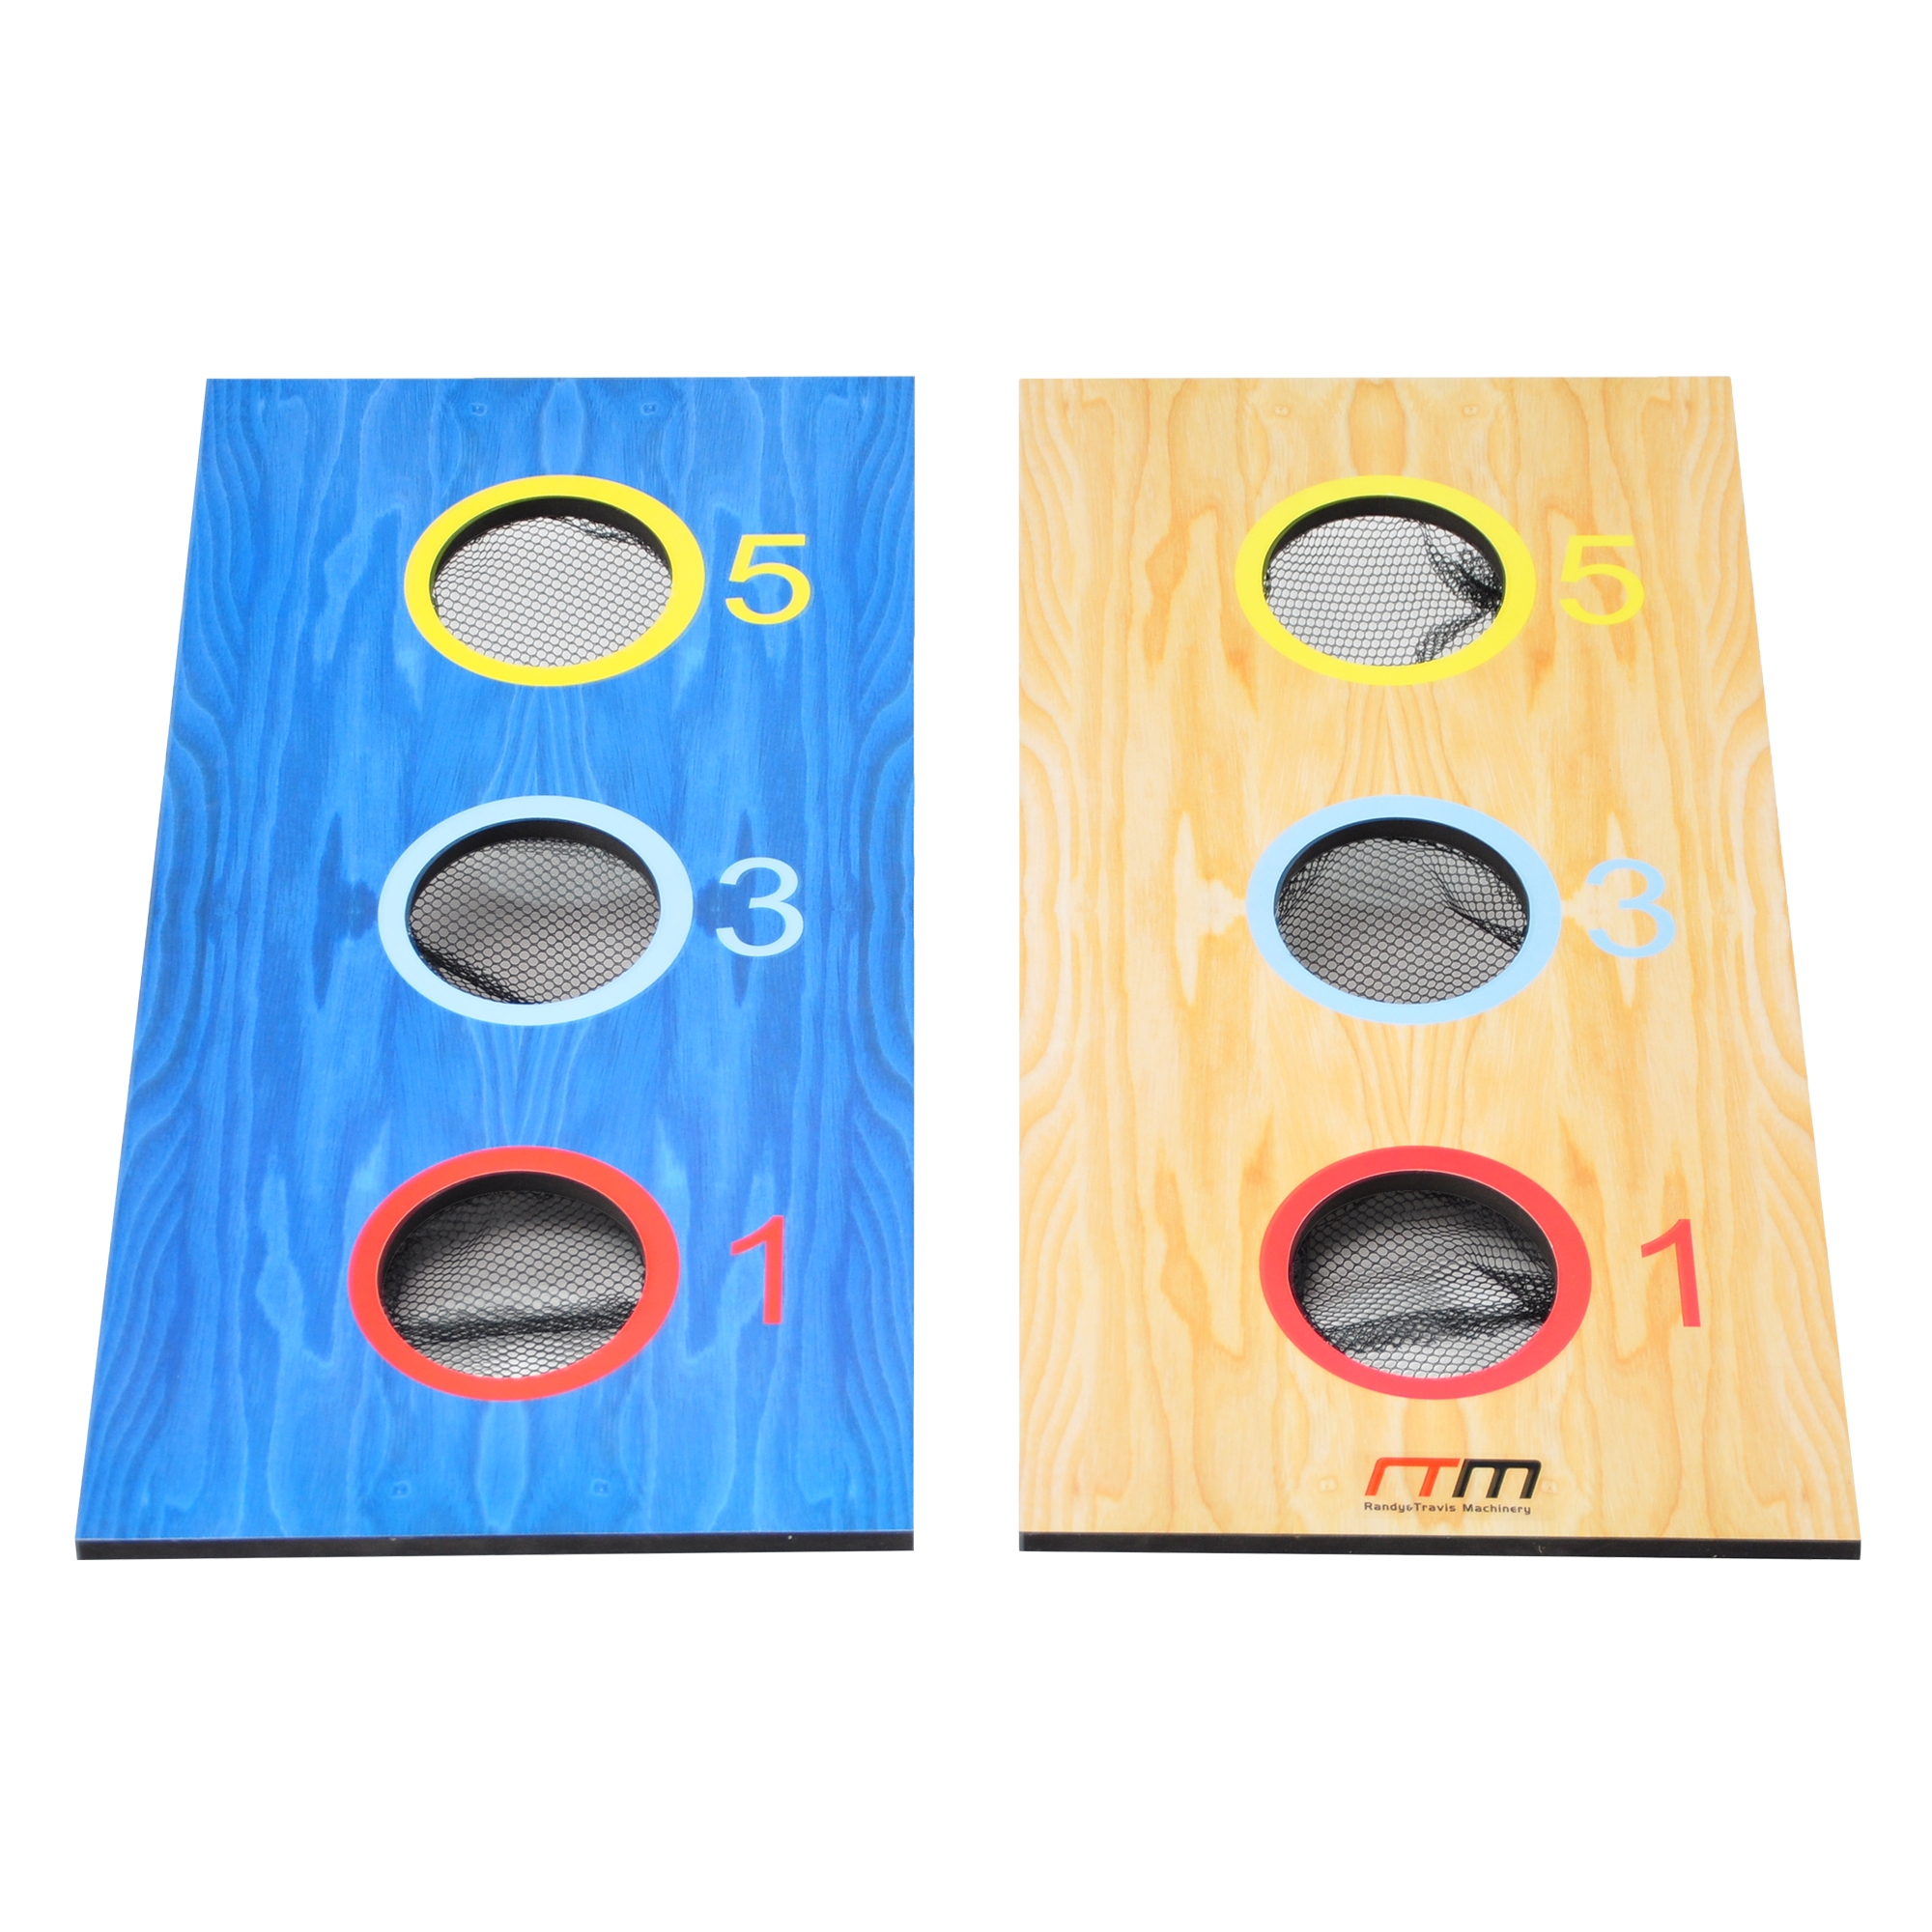 2-in-1 Three-Hole Bags and Washer Toss Combo Cornhole Portable Outdoor ...